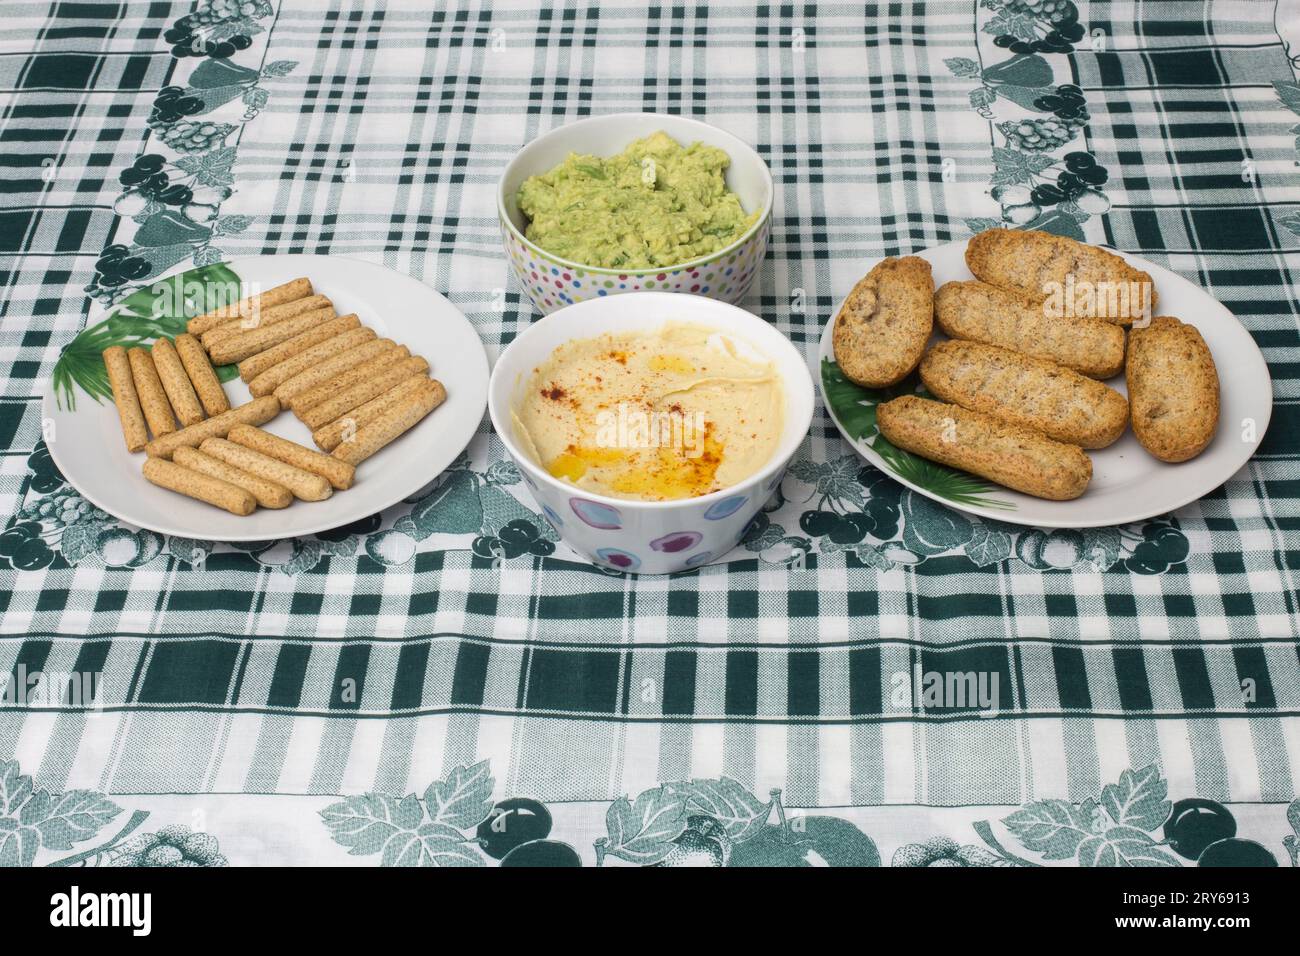 A tablecloth with geometric patterns and elegant leaves decorates the table, where two bowls of hummus and guacamole are served with whole wheat toast Stock Photo